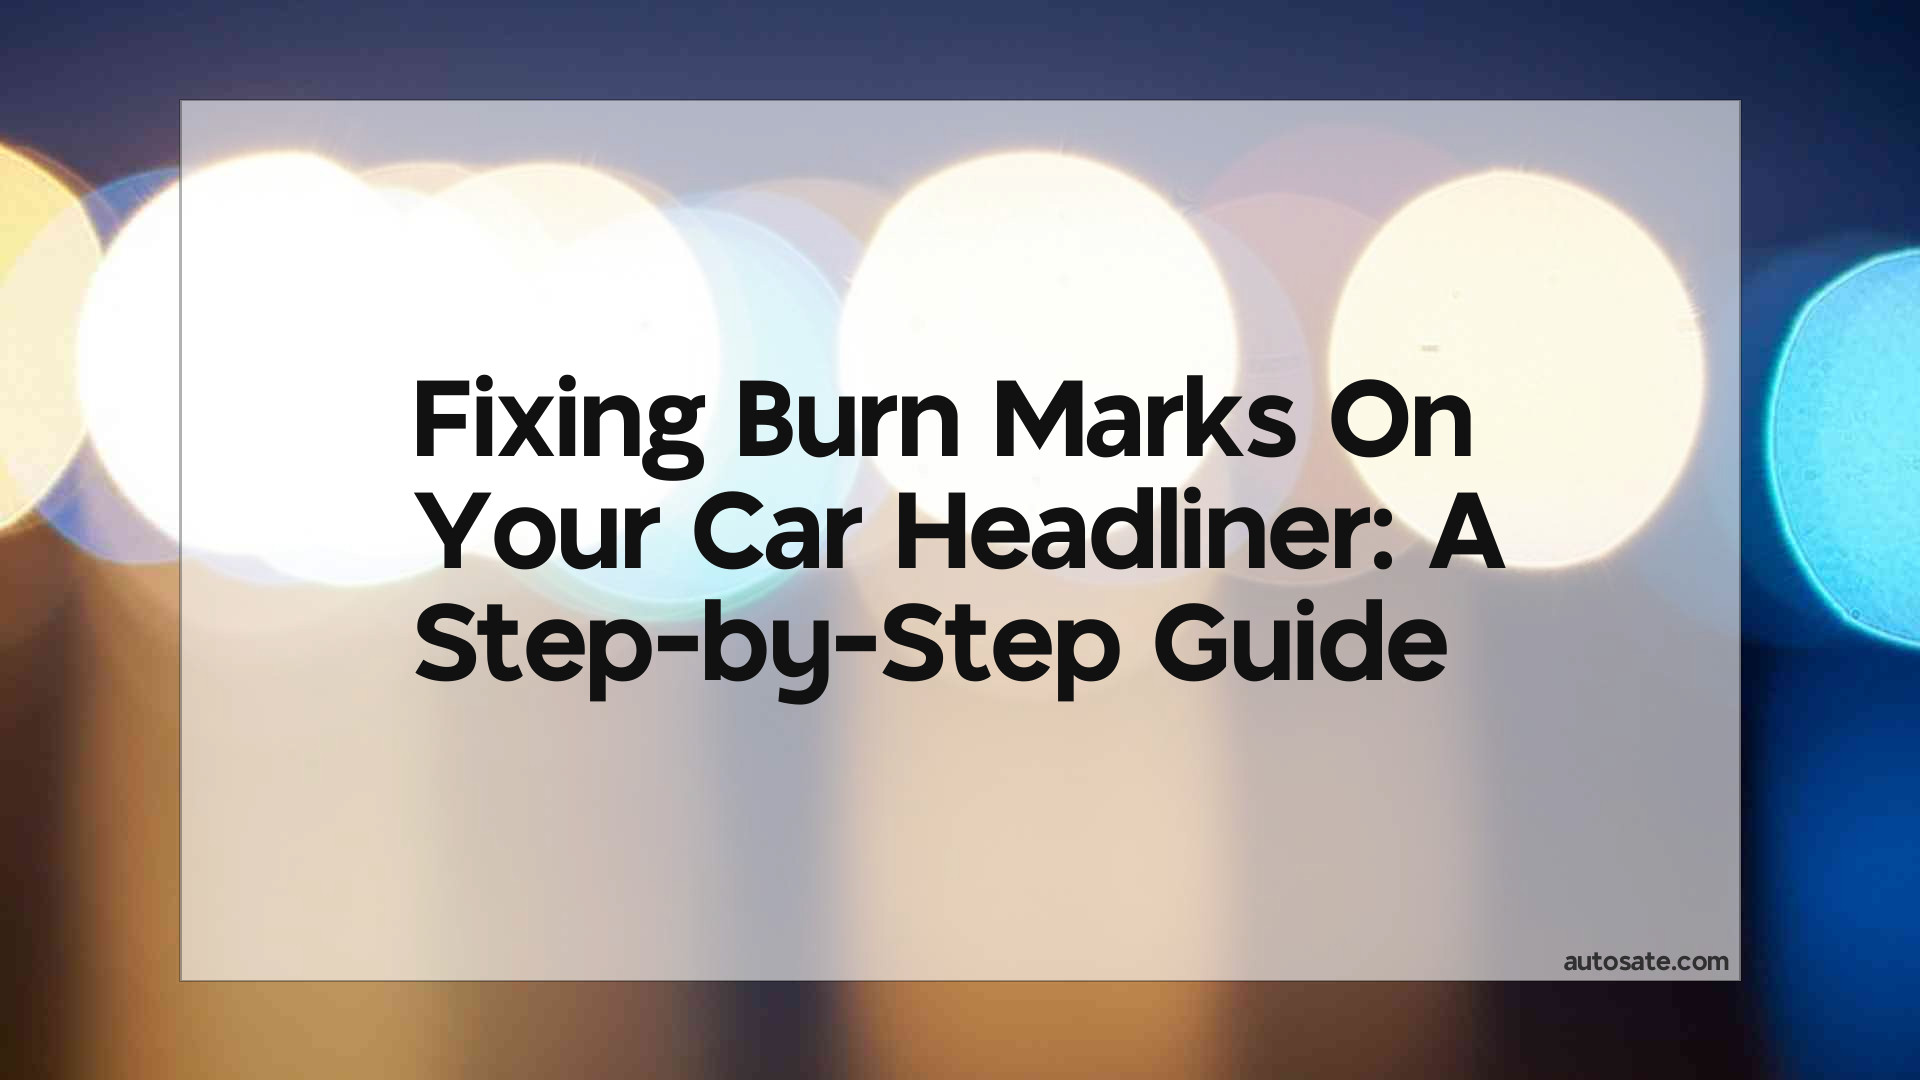 Fixing Burn Marks On Your Car Headliner: A Step-By-Step Guide